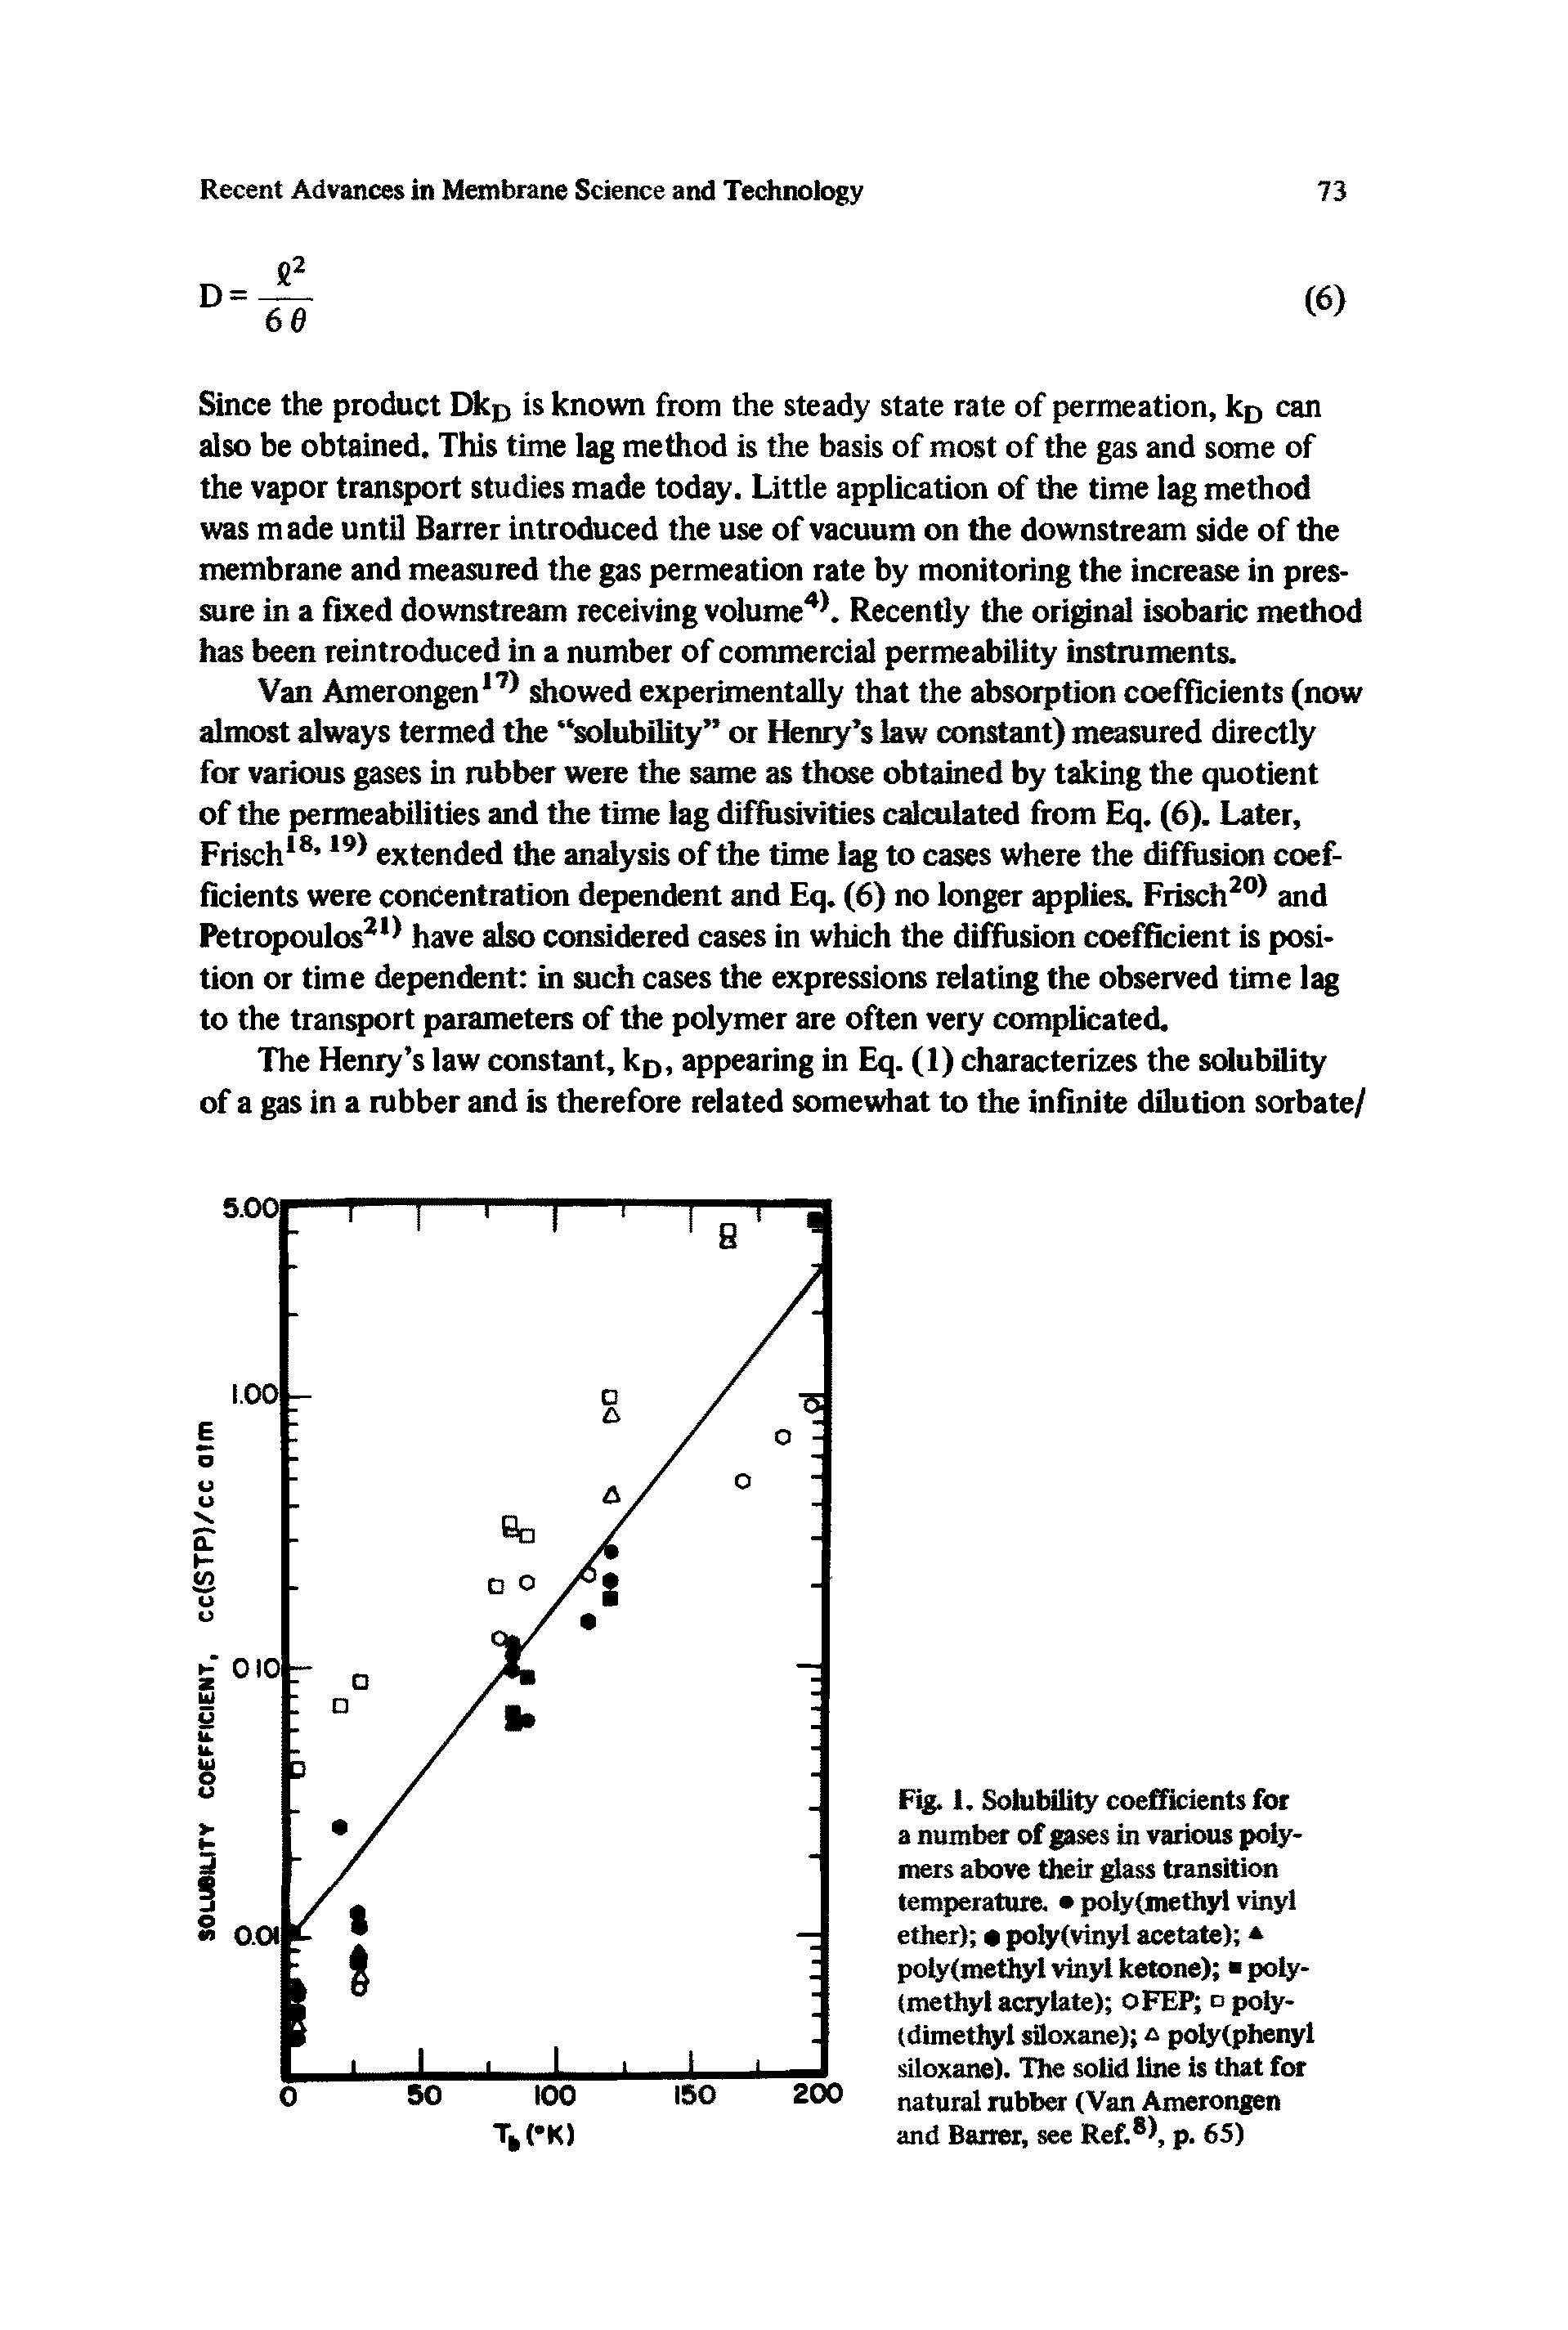 Fig. 1. Solubility coefficients for a number of gases in various polymers above their j ass transition temperature. poly methyl vinyl ether) polyfvinyl acetate) a poly(methyl vinyl ketone) poly-(methyl acrylate) OFEP o poly-(dimethyl siloxane) o polytphenyl siloxane). The solid line is that for natural rubber (Van Amerongen and Barret, see Ref. l, p. 65)...